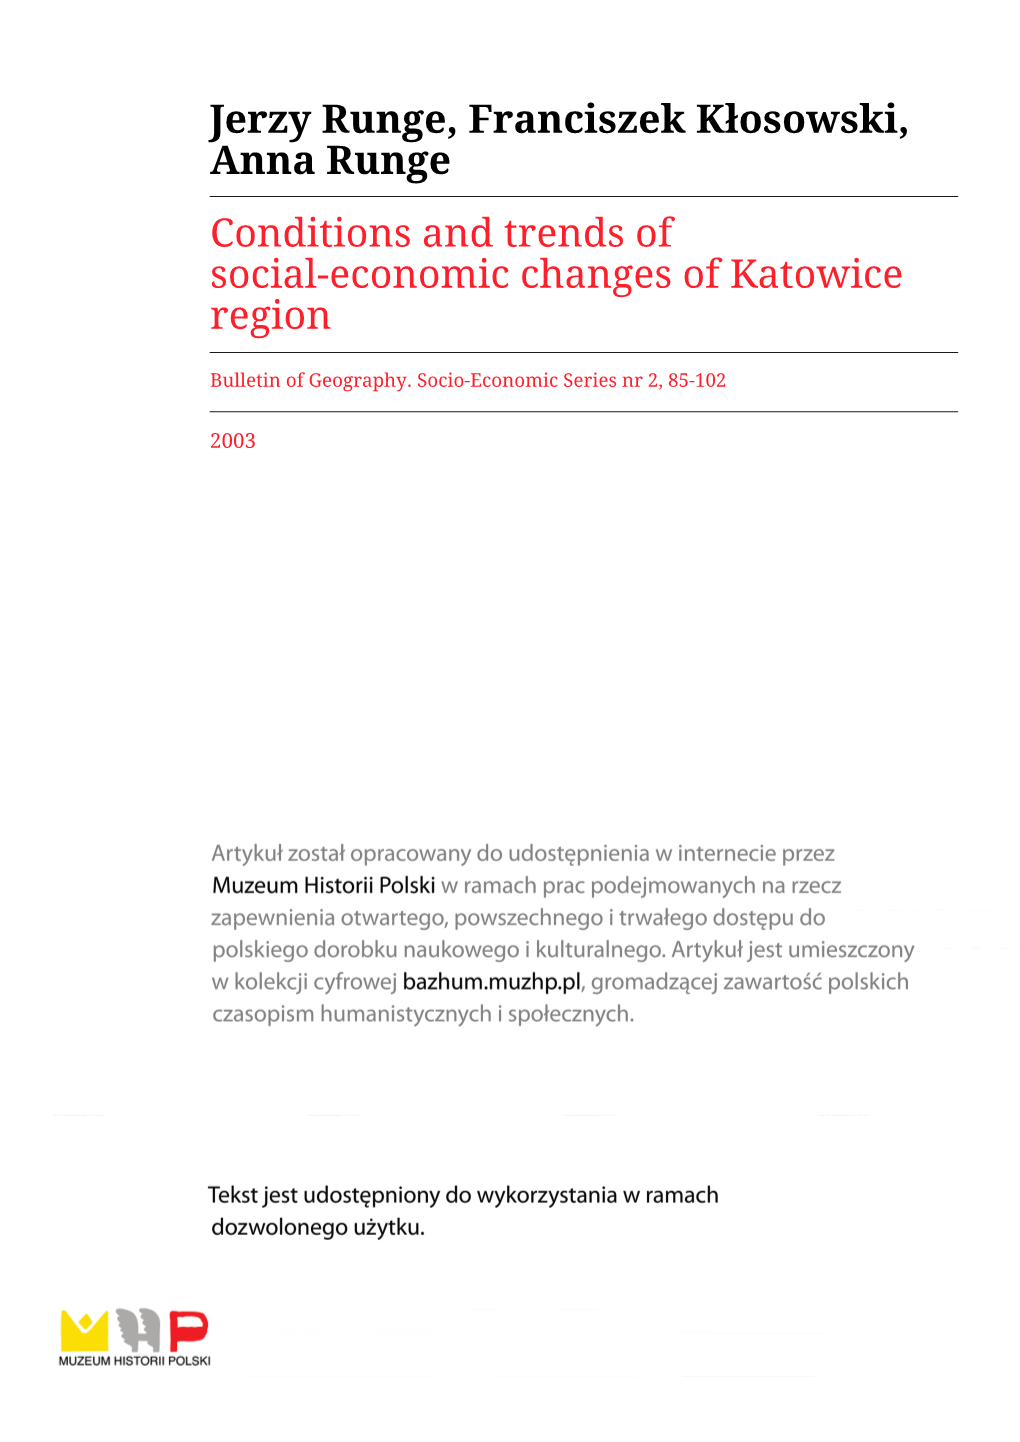 Jerzy Runge, Franciszek Kłosowski, Anna Runge Conditions and Trends of Social-Economic Changes of Katowice Region